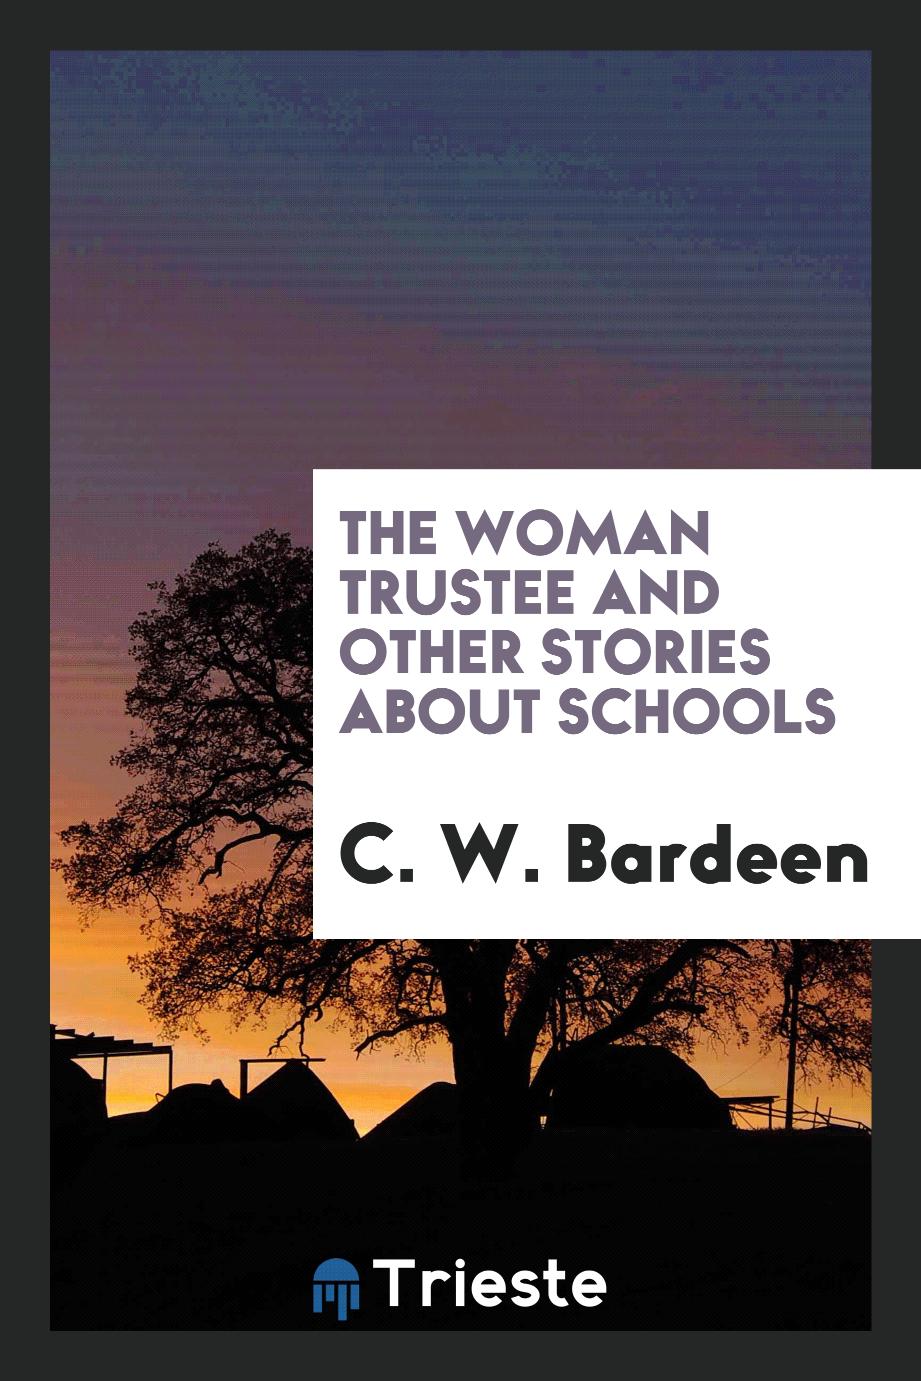 The woman trustee and other stories about schools